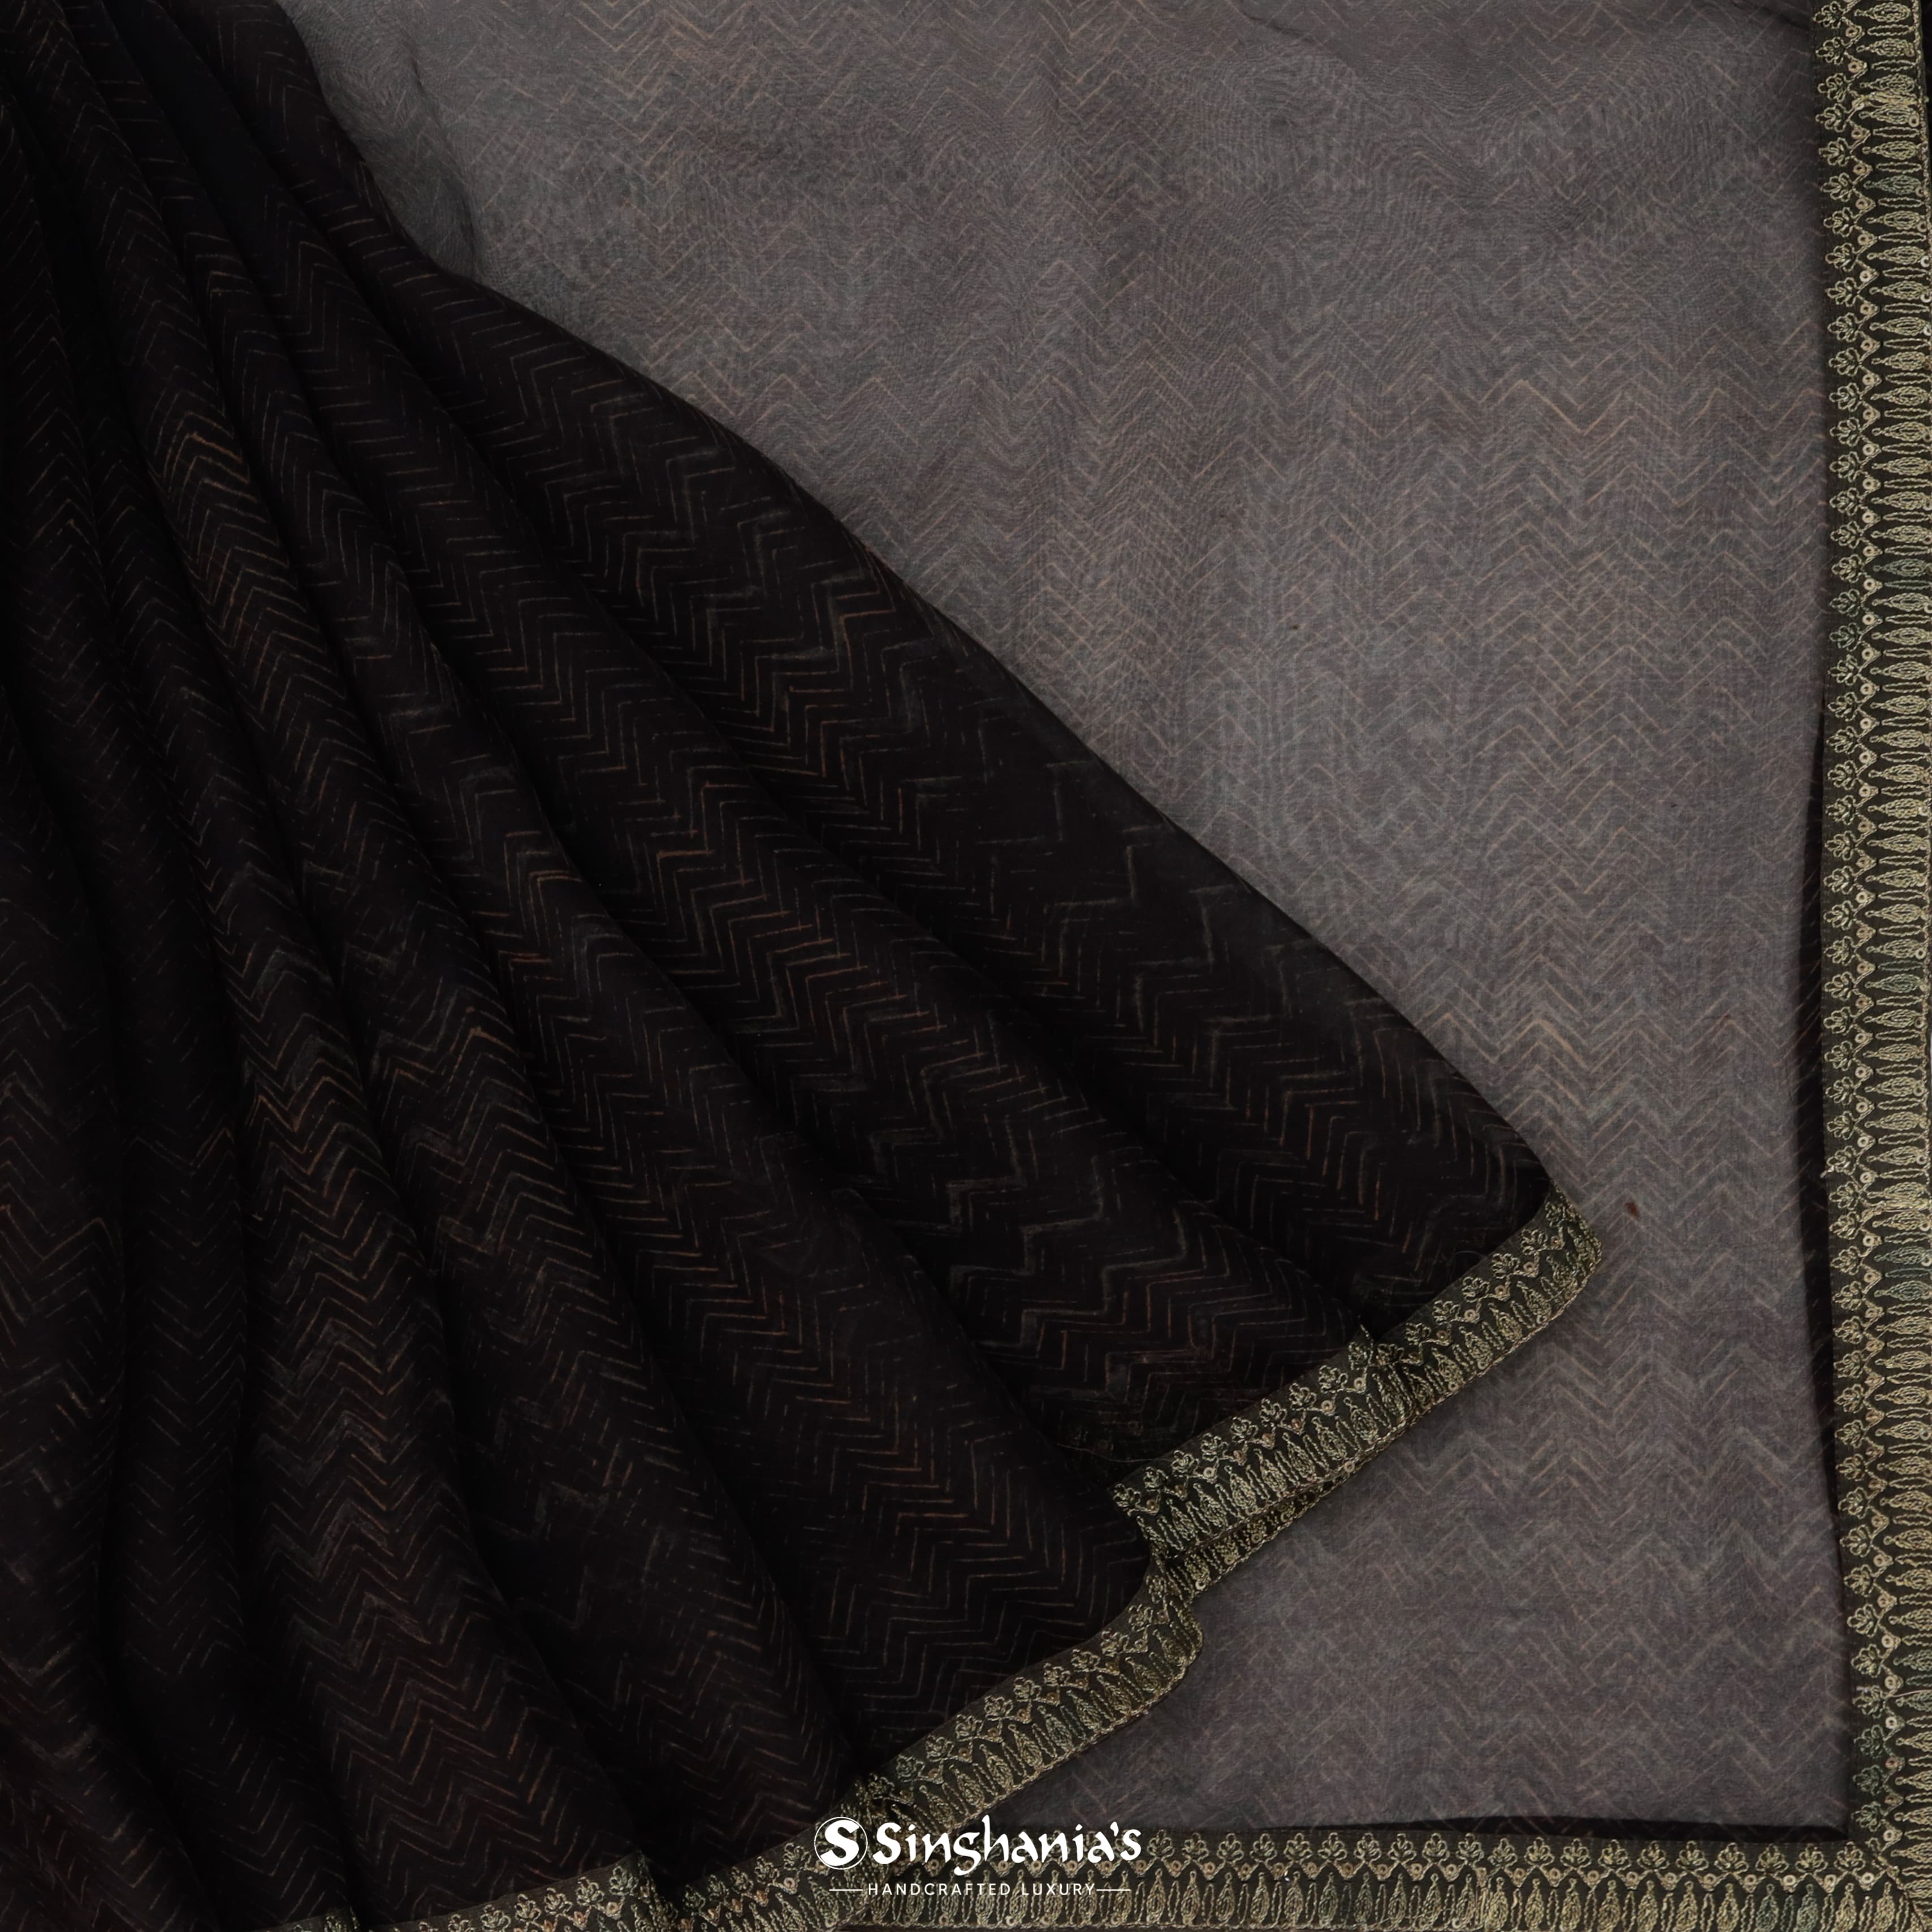 Pitch Black Organza Embroidery Saree With Stripes Pattern